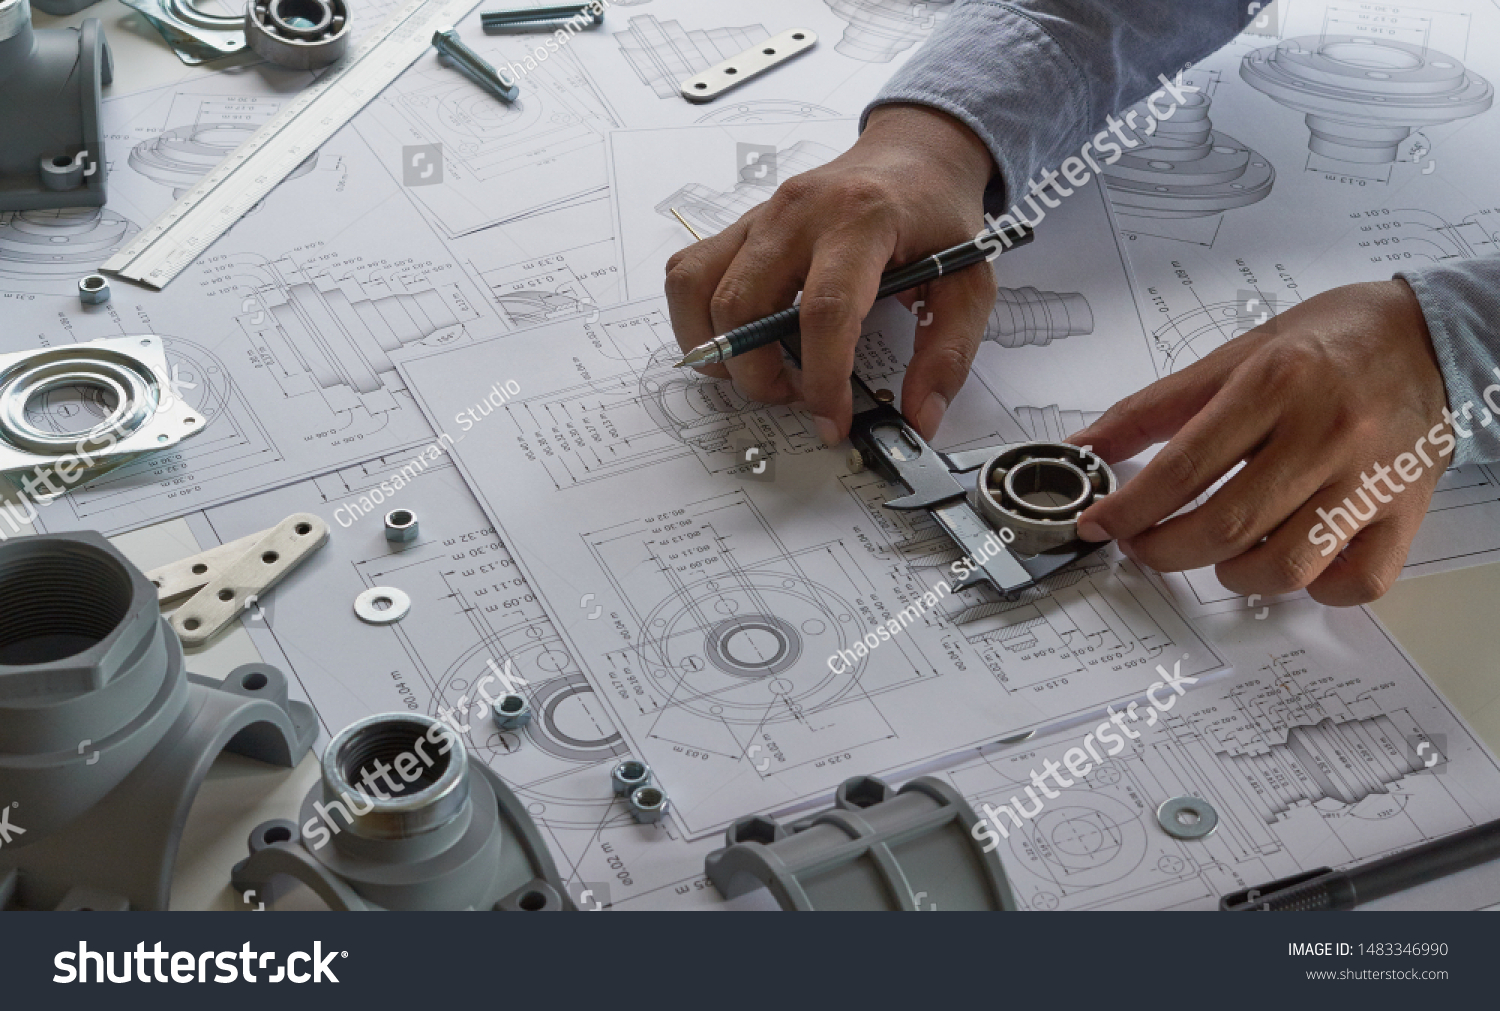 Engineer technician designing drawings mechanical parts engineering Engine
manufacturing factory Industry Industrial work project blueprints measuring bearings caliper tools #1483346990